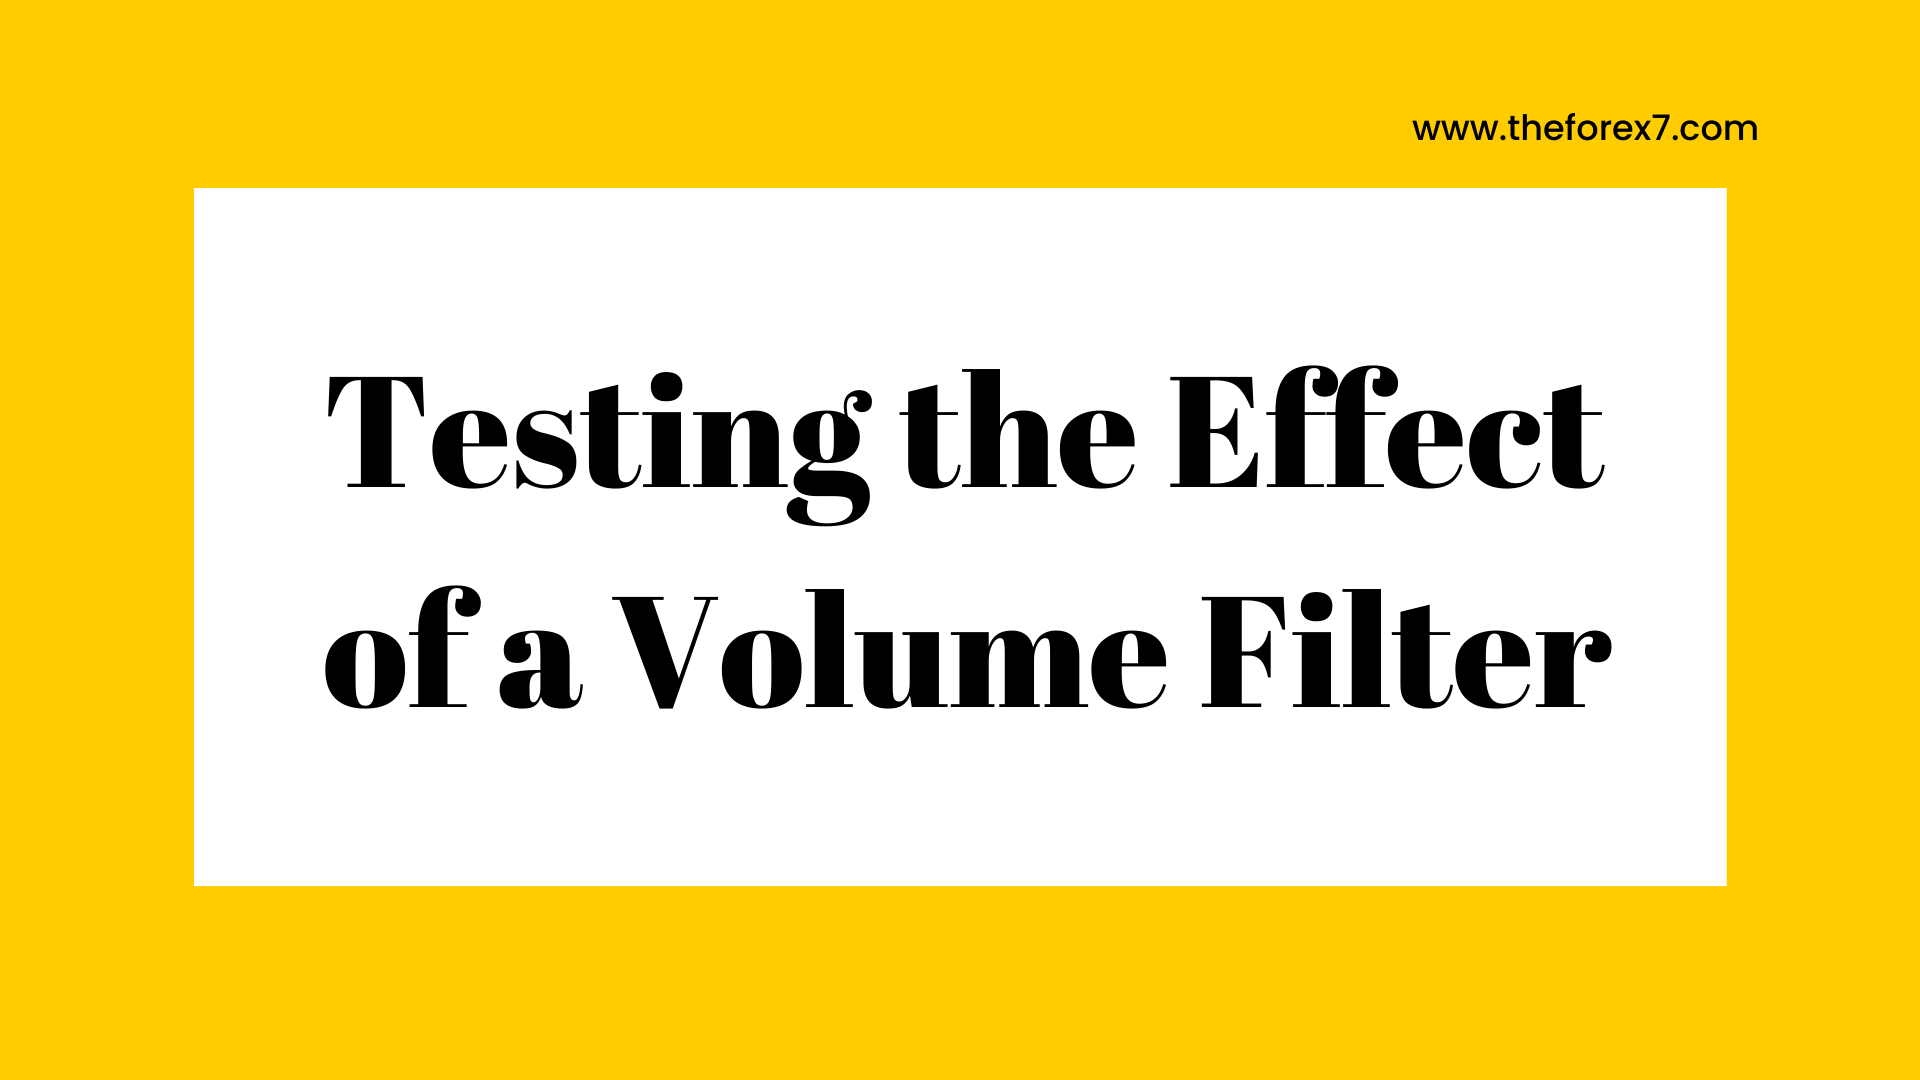 Testing the Effect of a Volume Filter